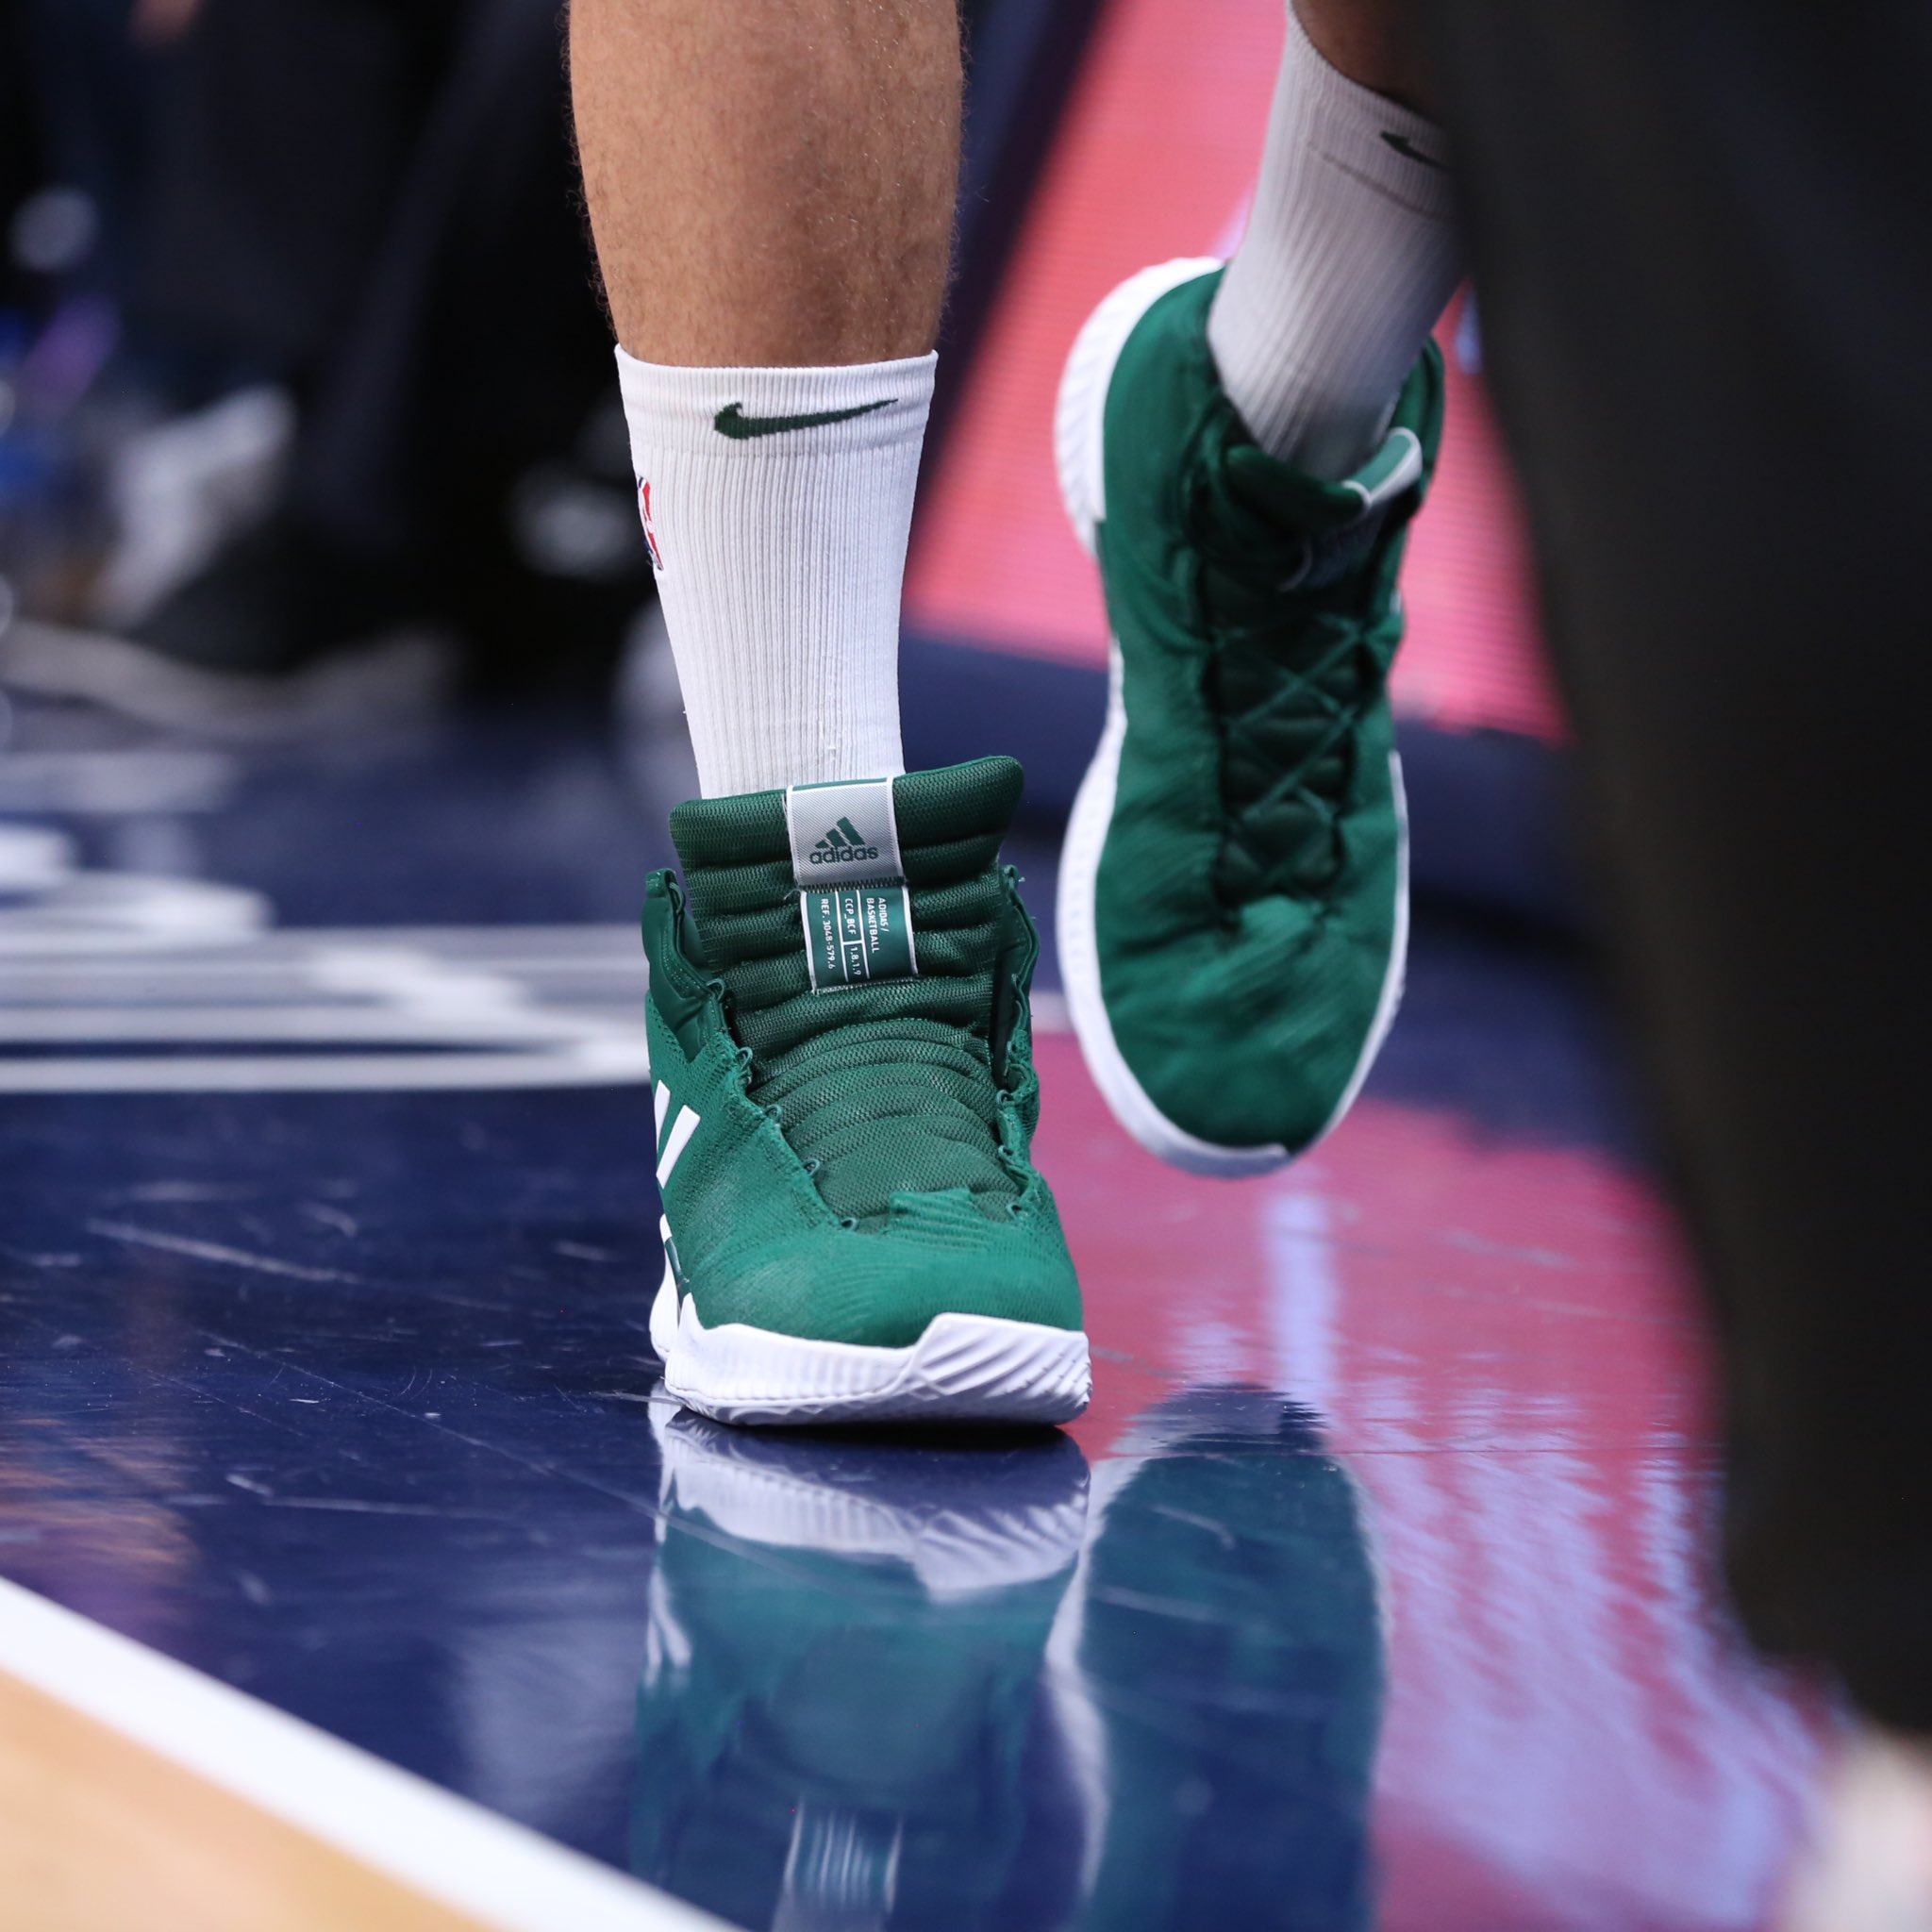 Por Entre Perenne Milwaukee Bucks on Twitter: "Brook Lopez is so hot right now, his shoe lace  exploded!! #FearTheDeer https://t.co/w7CFG3JJ0Q" / Twitter